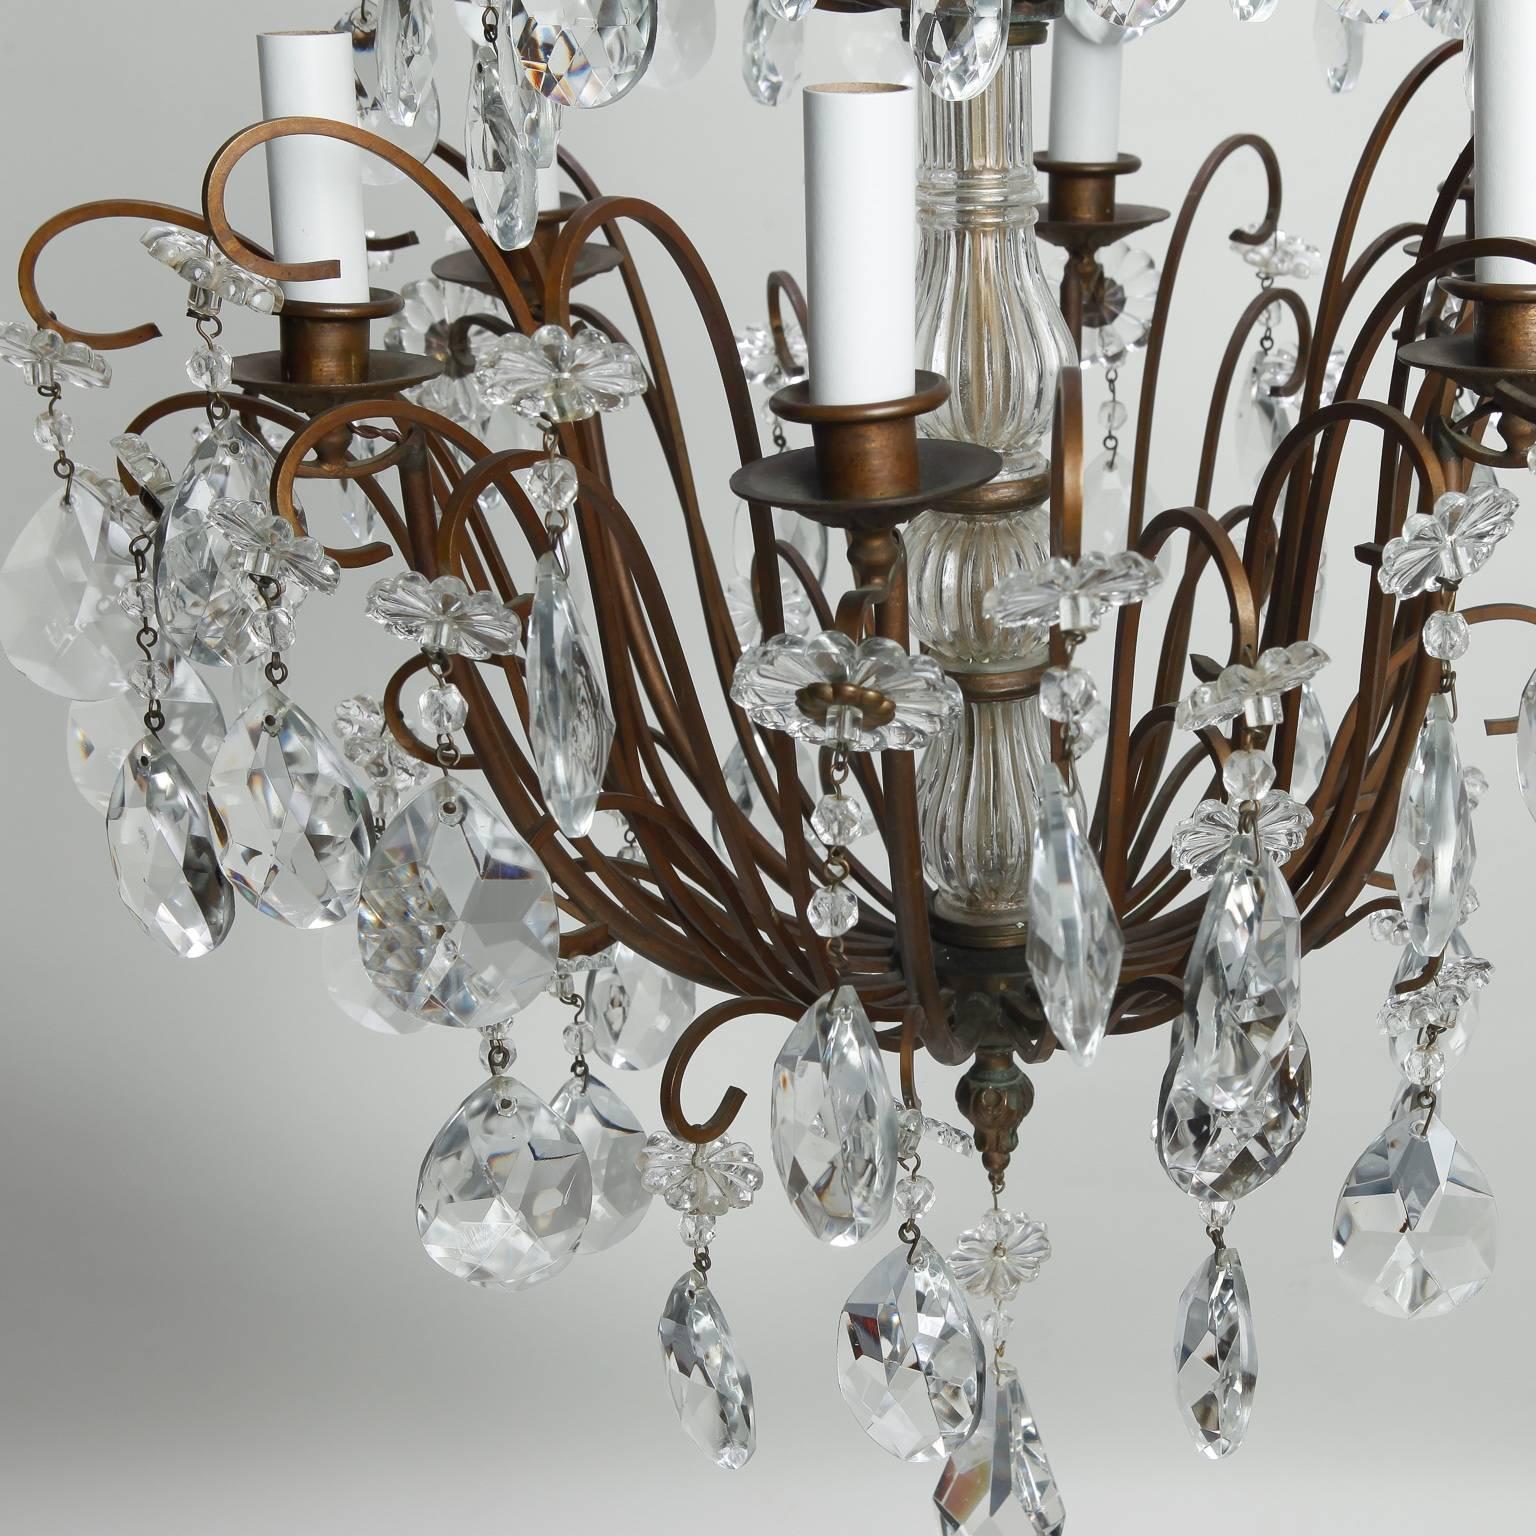 Tall, Italian six-light chandelier has a dark metal frame and three tiers of crystal pendants and large center drop, circa 1900. New wiring for US electrical standards.